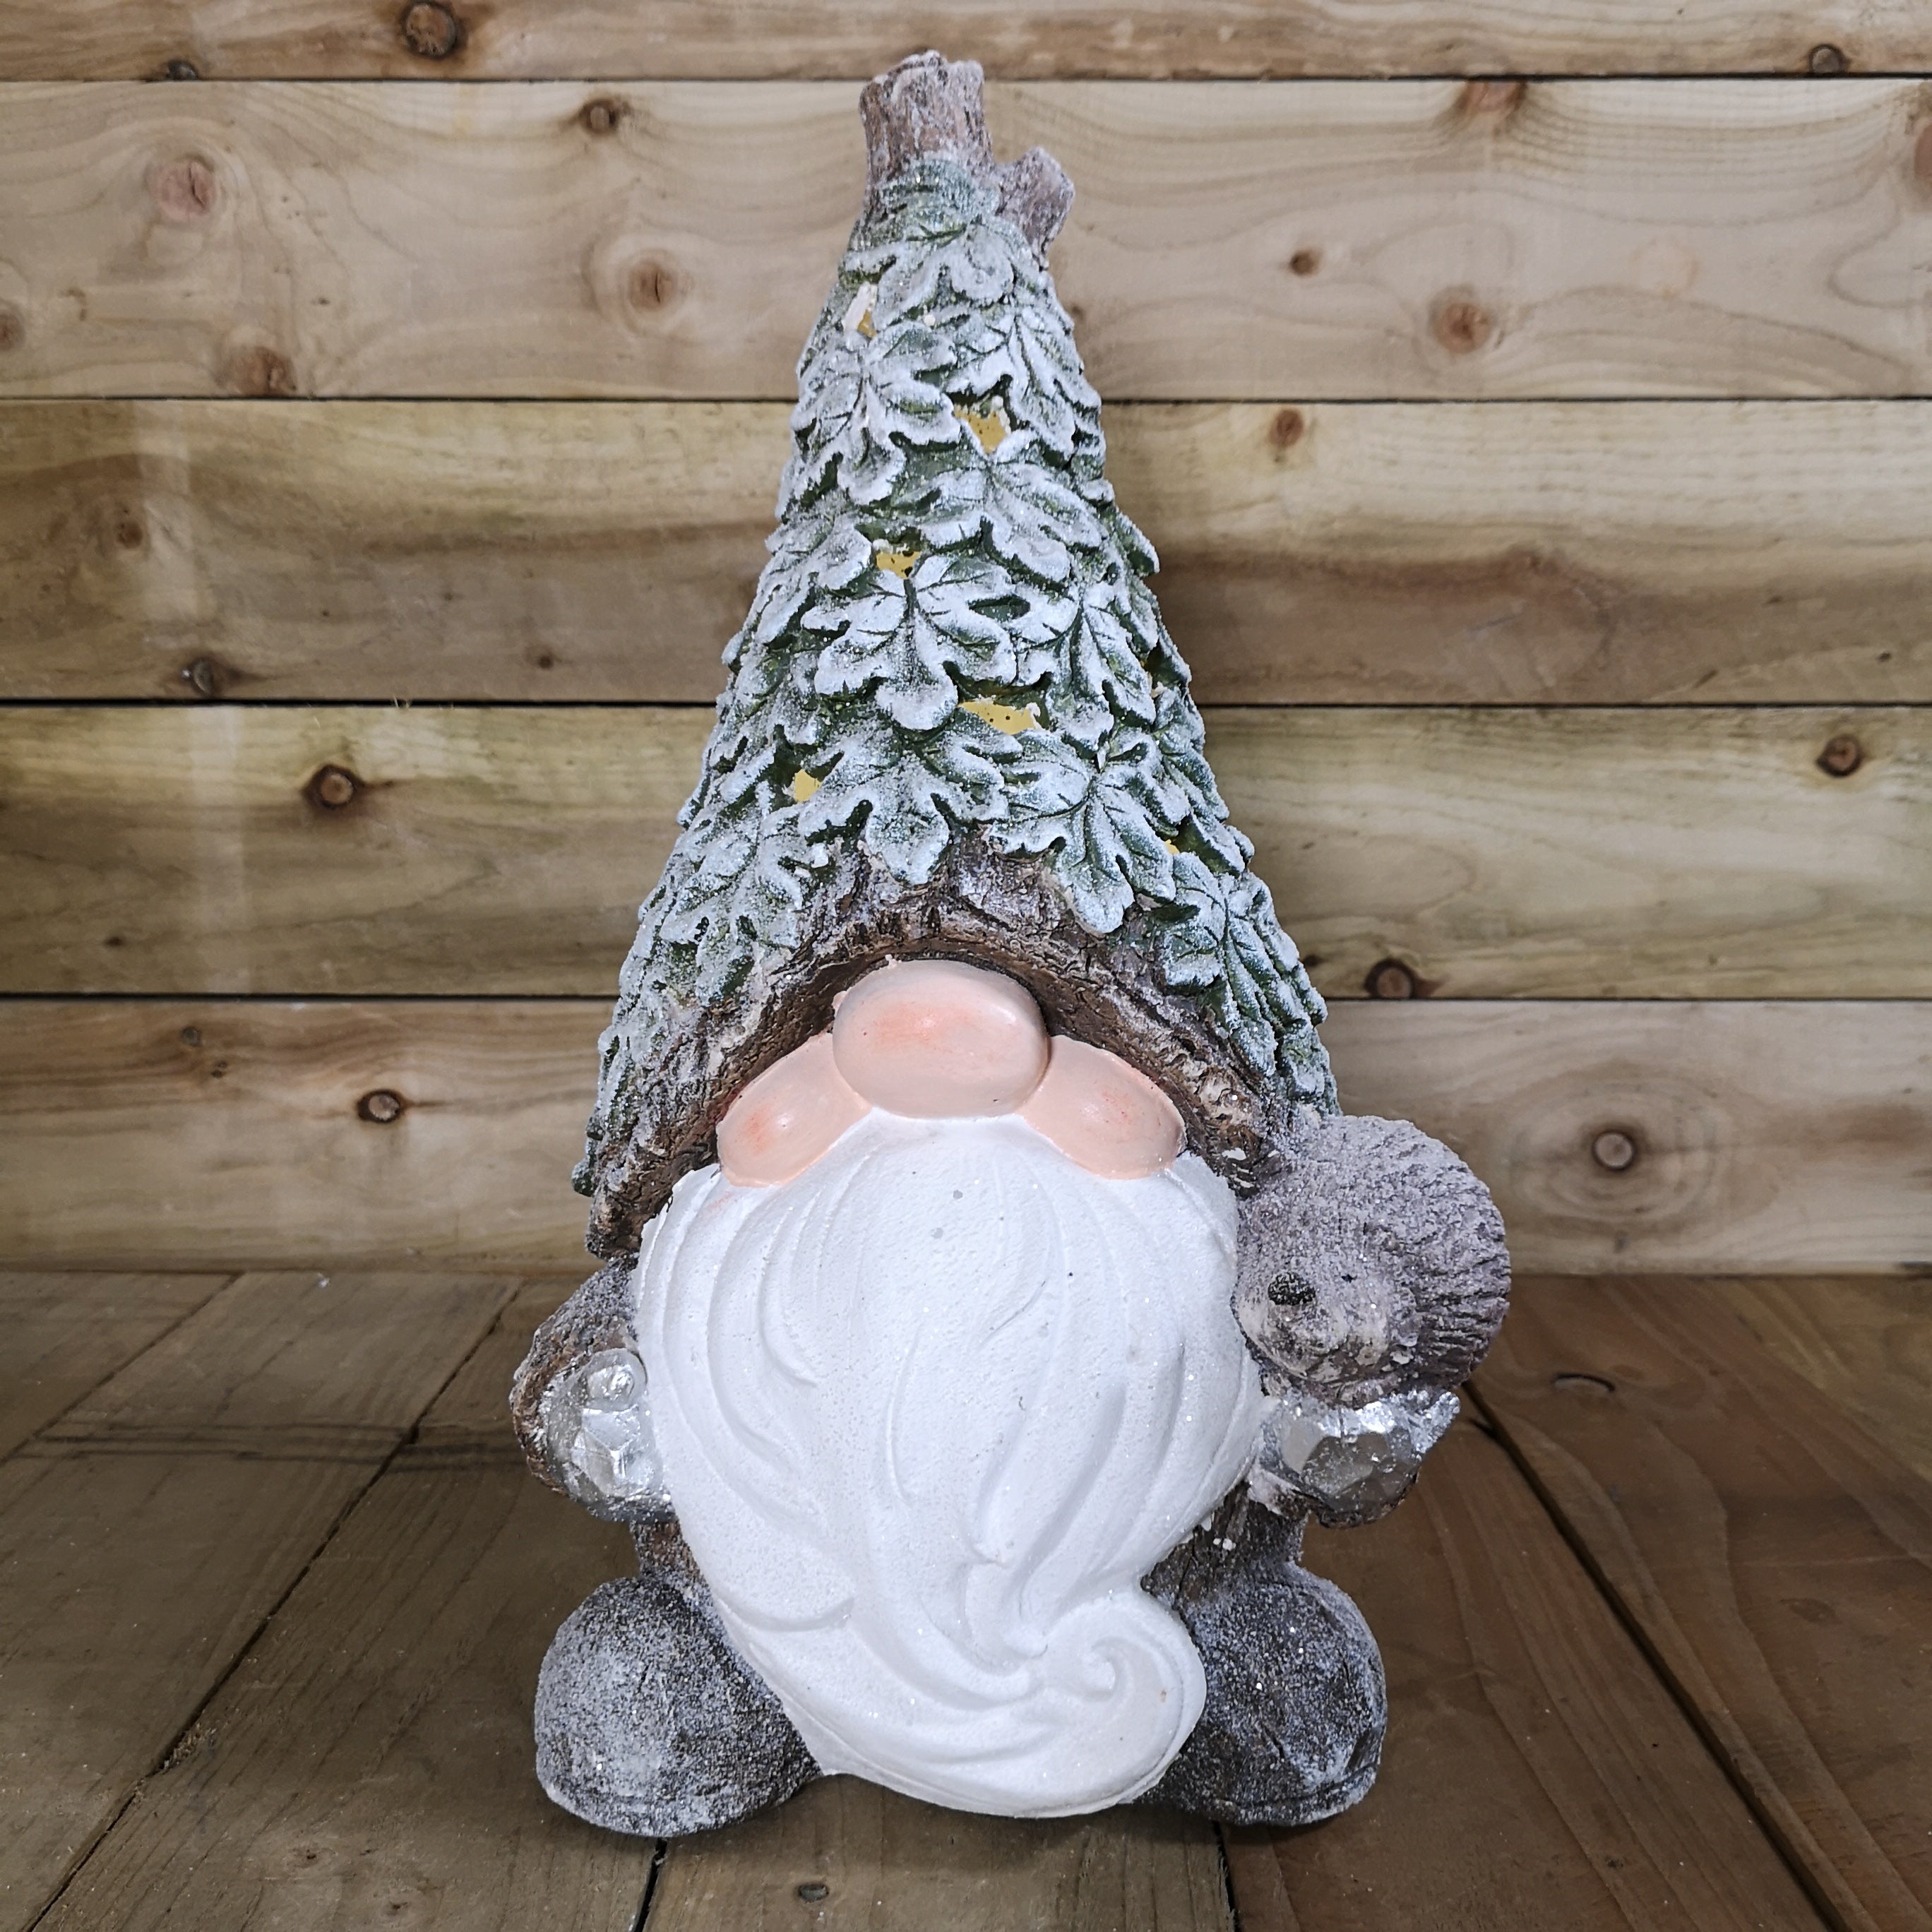 50cm Battery LED Christmas Gnome Ornament with Ivy Leaf Hat in Warm White